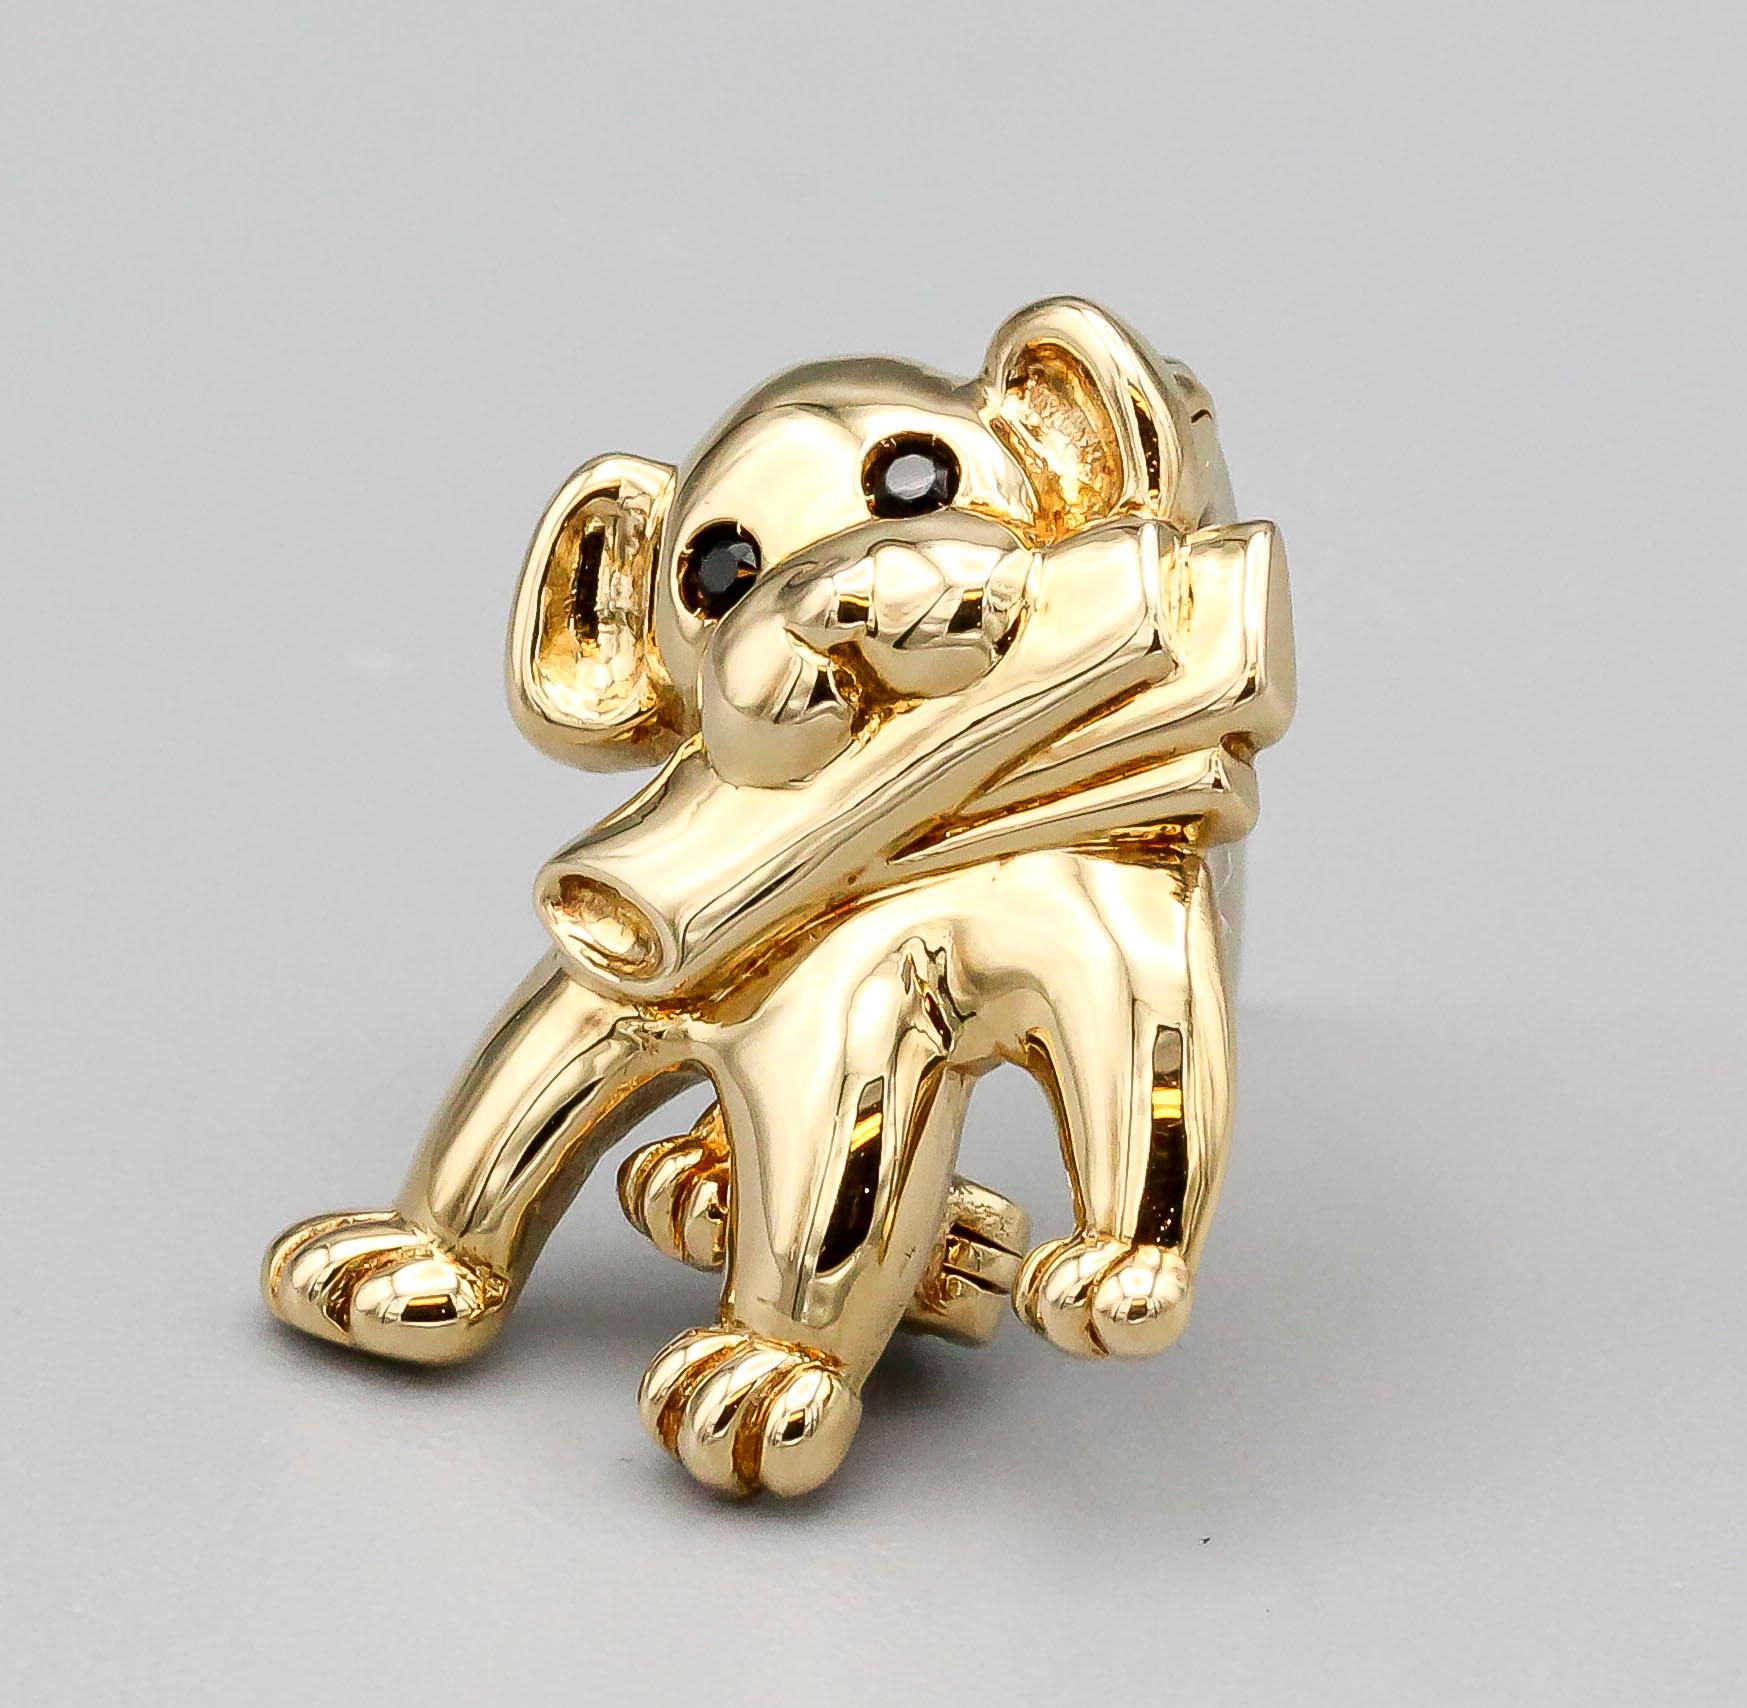 Fine and rare brooch by Van Cleef and Arpels, of French origin and circa late 20th Century.  This charming brooch is made in the likeness of a small dog with a rolled up newspaper in its mouth.  

Hallmarks: VCA 18kt reference numbers, 96, French